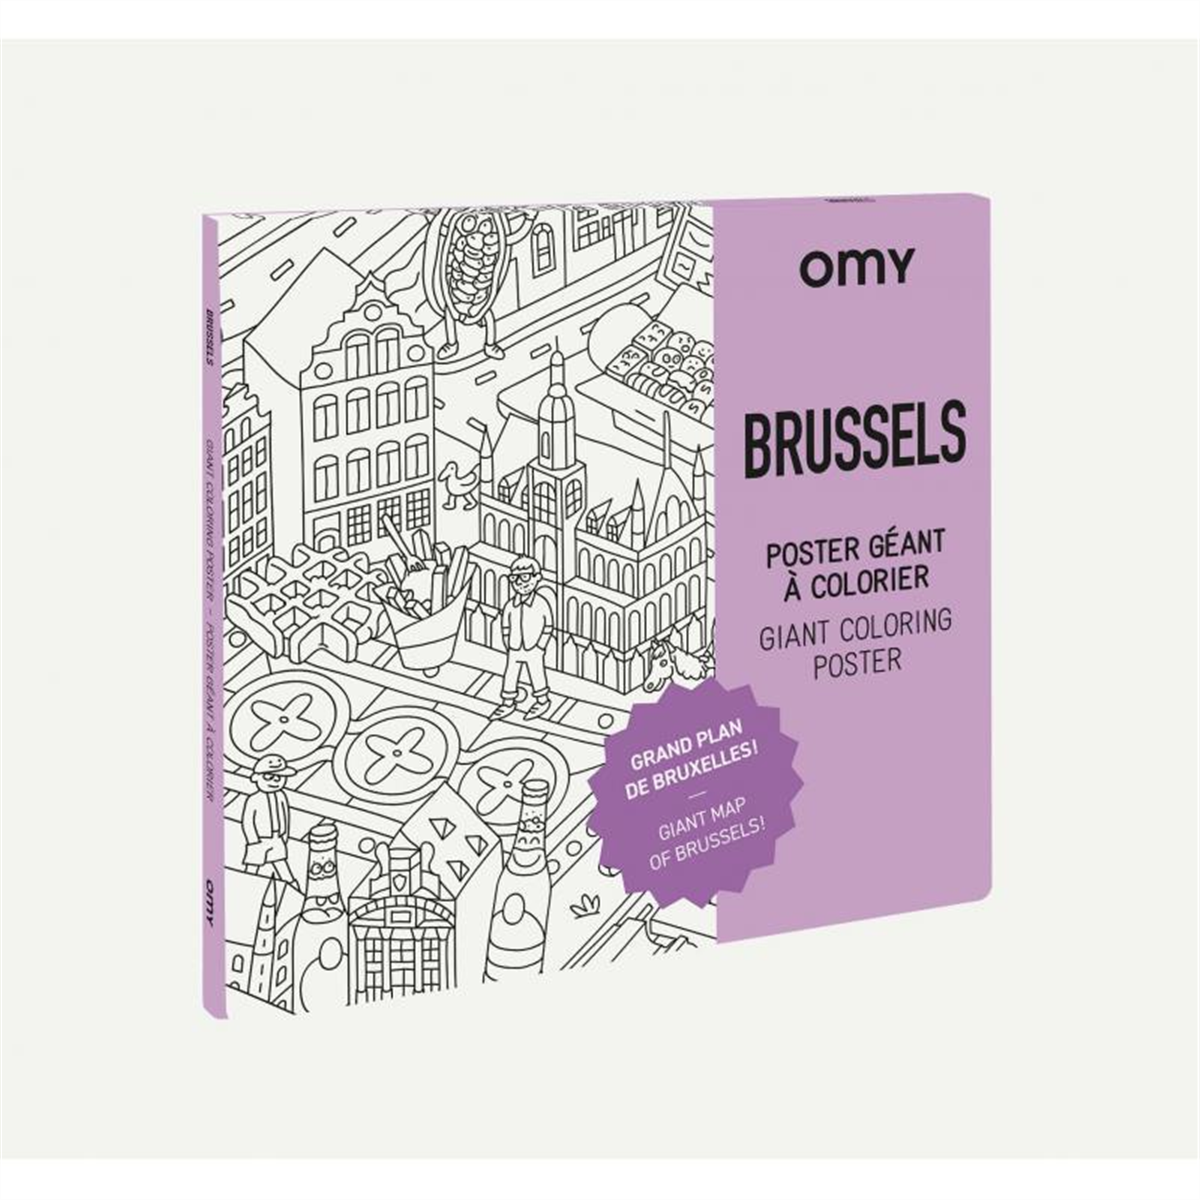 OMY - Brussels Giant Poster